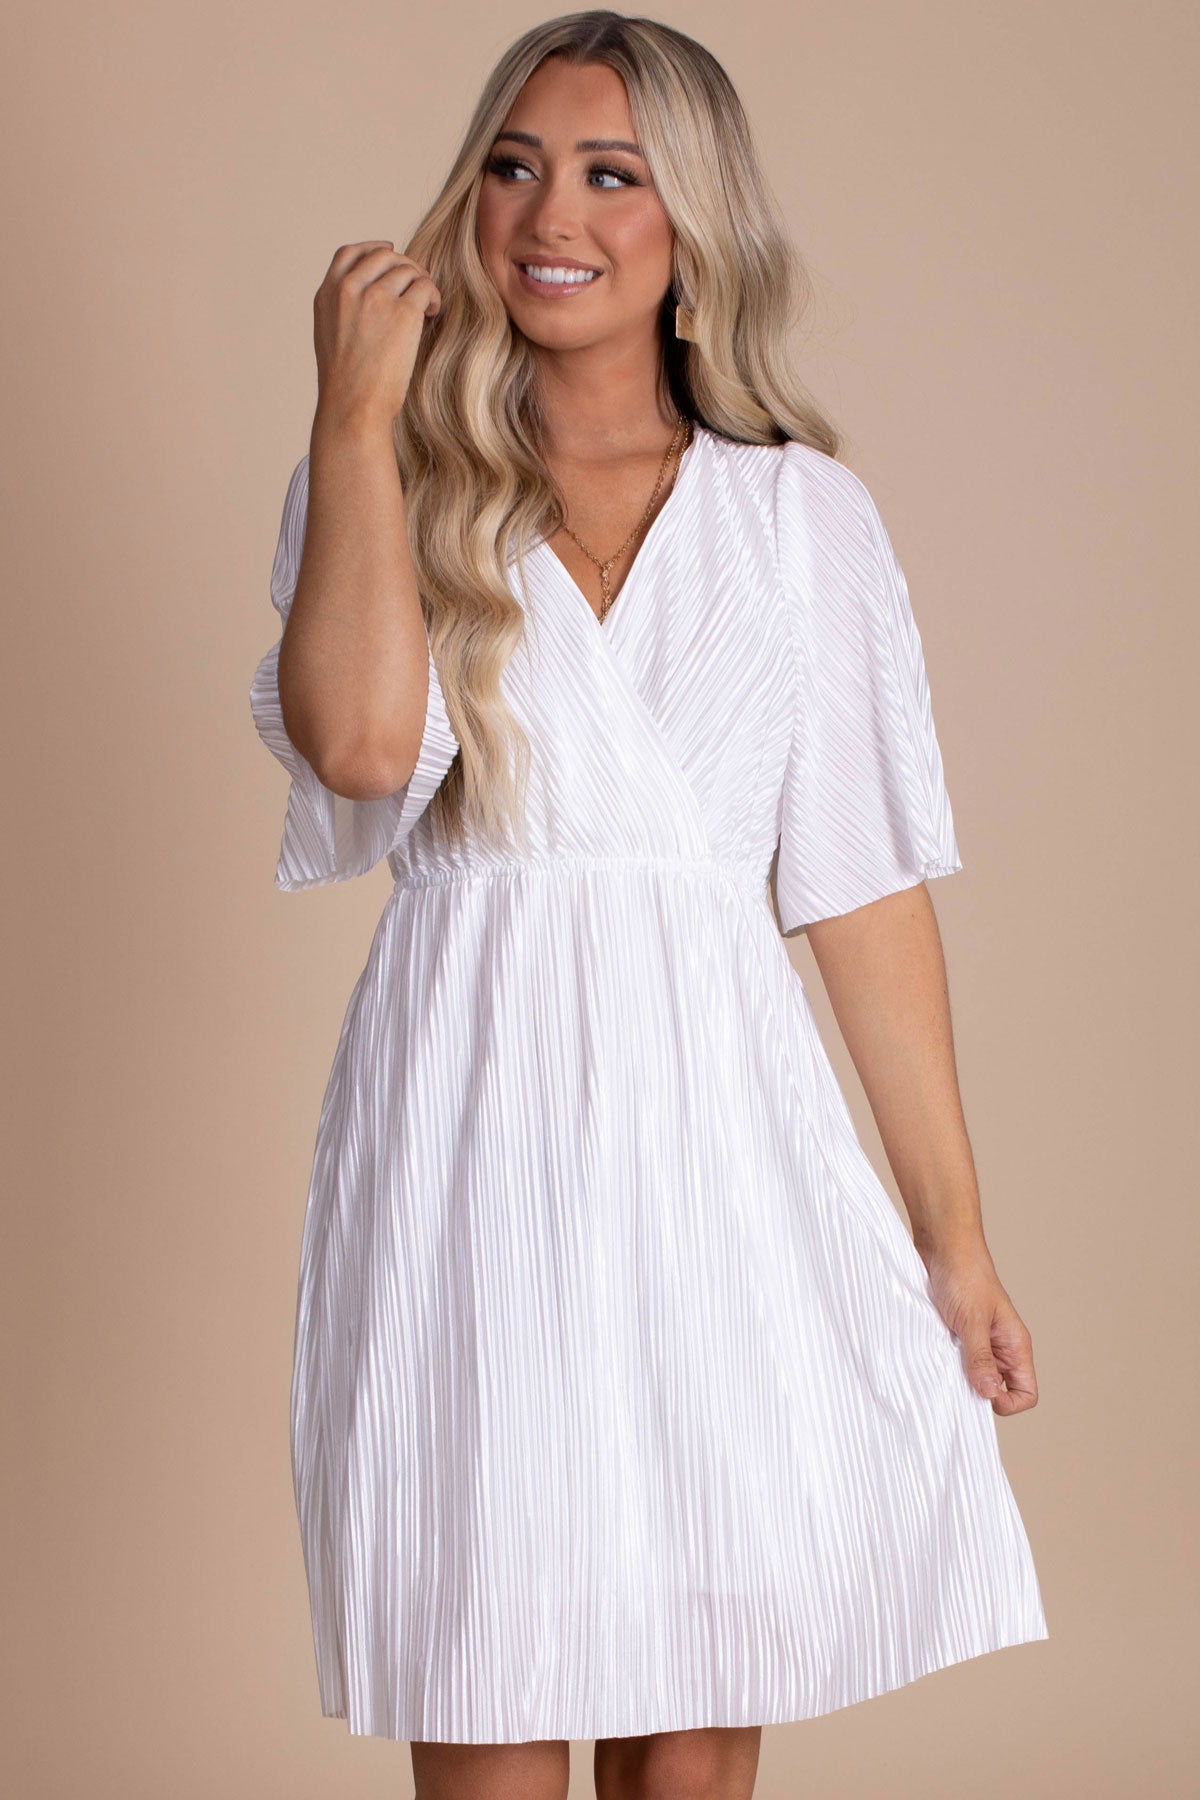 Women's Cute and Comfortable Boutique Mini Dress in Off White